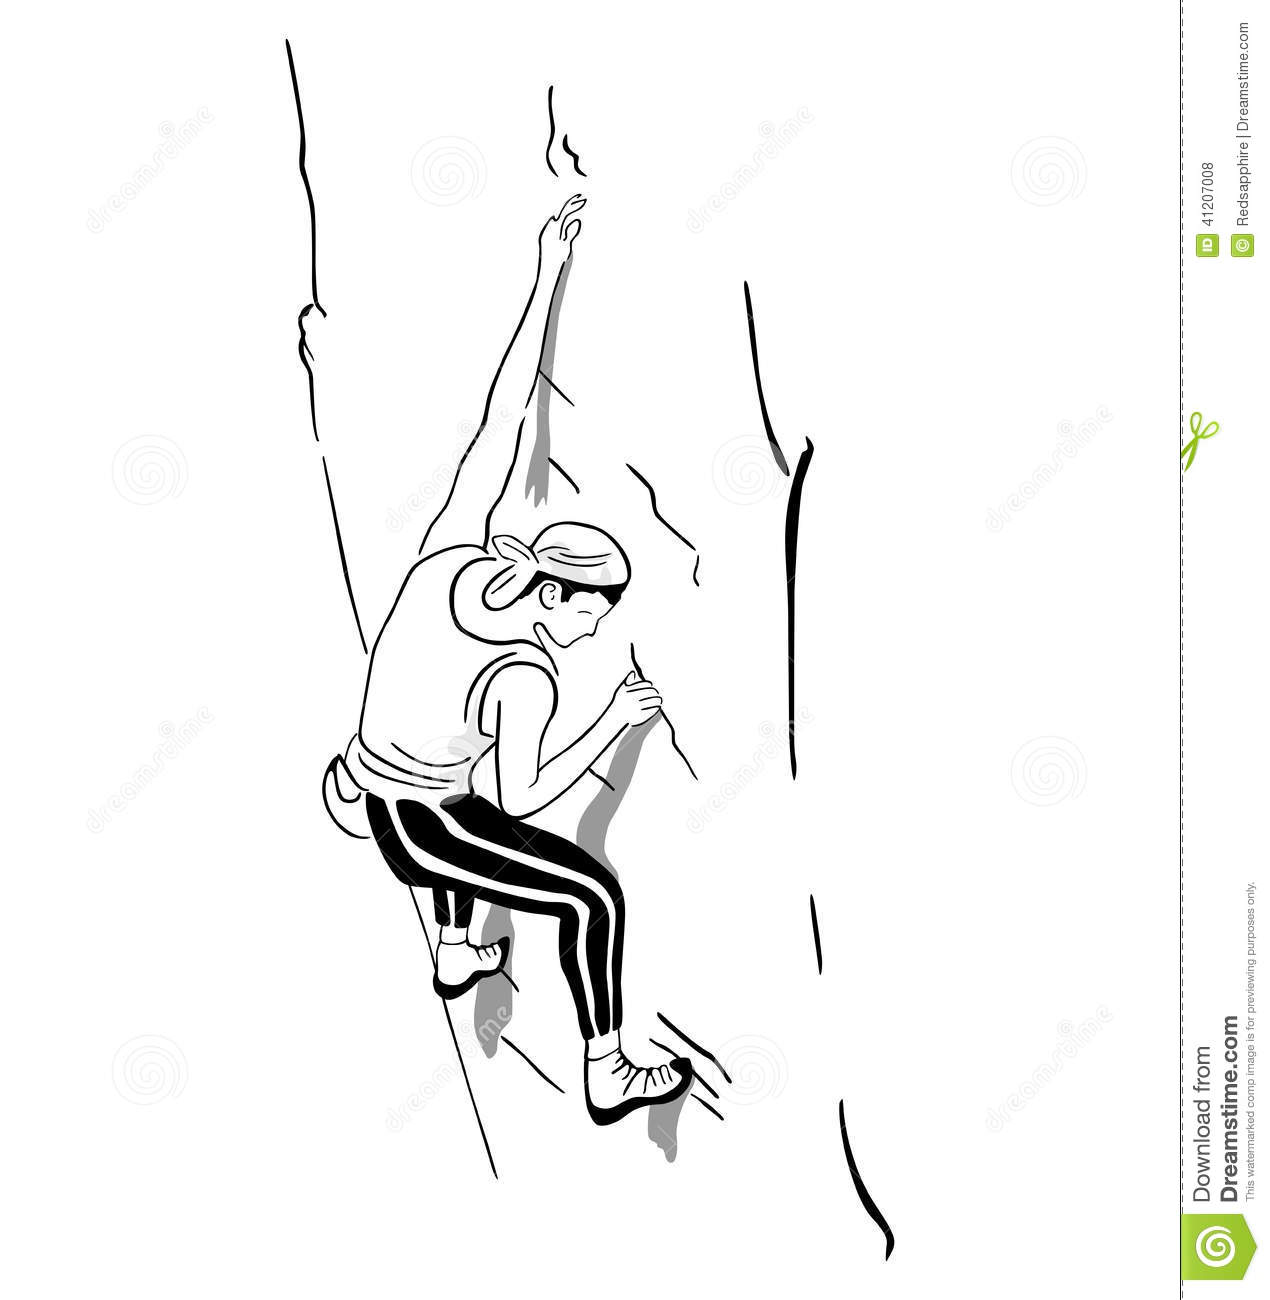 Extreme Climbing clipart #20, Download drawings